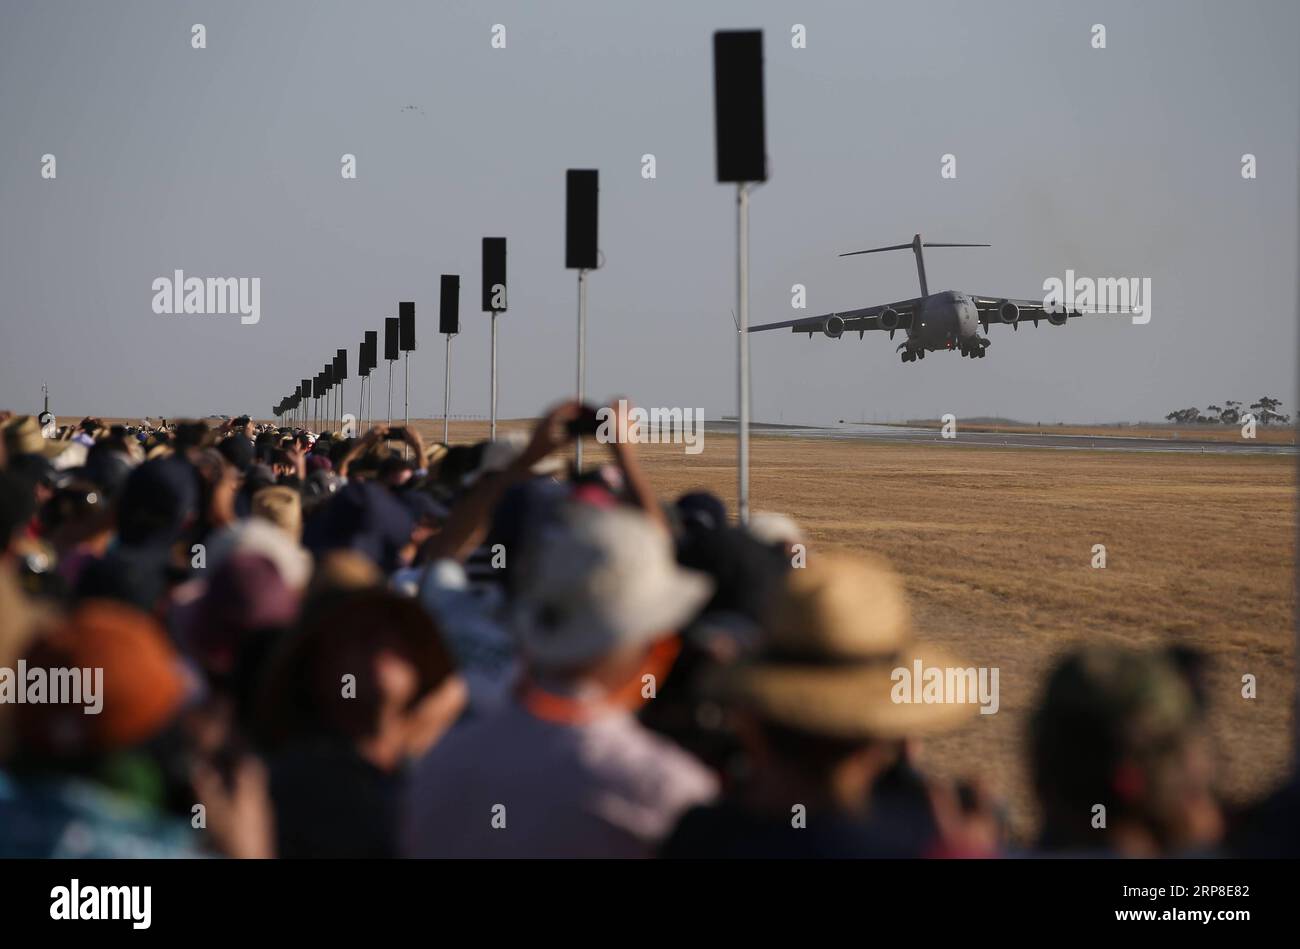 (190301) -- MELBOURNE, March 1, 2019 -- Visitors view an airplane performing during the Australian International Airshow and Aerospace & Defence Exposition at the Avalon Airport, Melbourne, March 1, 2019. ) AUSTRALIA-MELBOURNE-AIR SHOW BaixXuefei PUBLICATIONxNOTxINxCHN Stock Photo